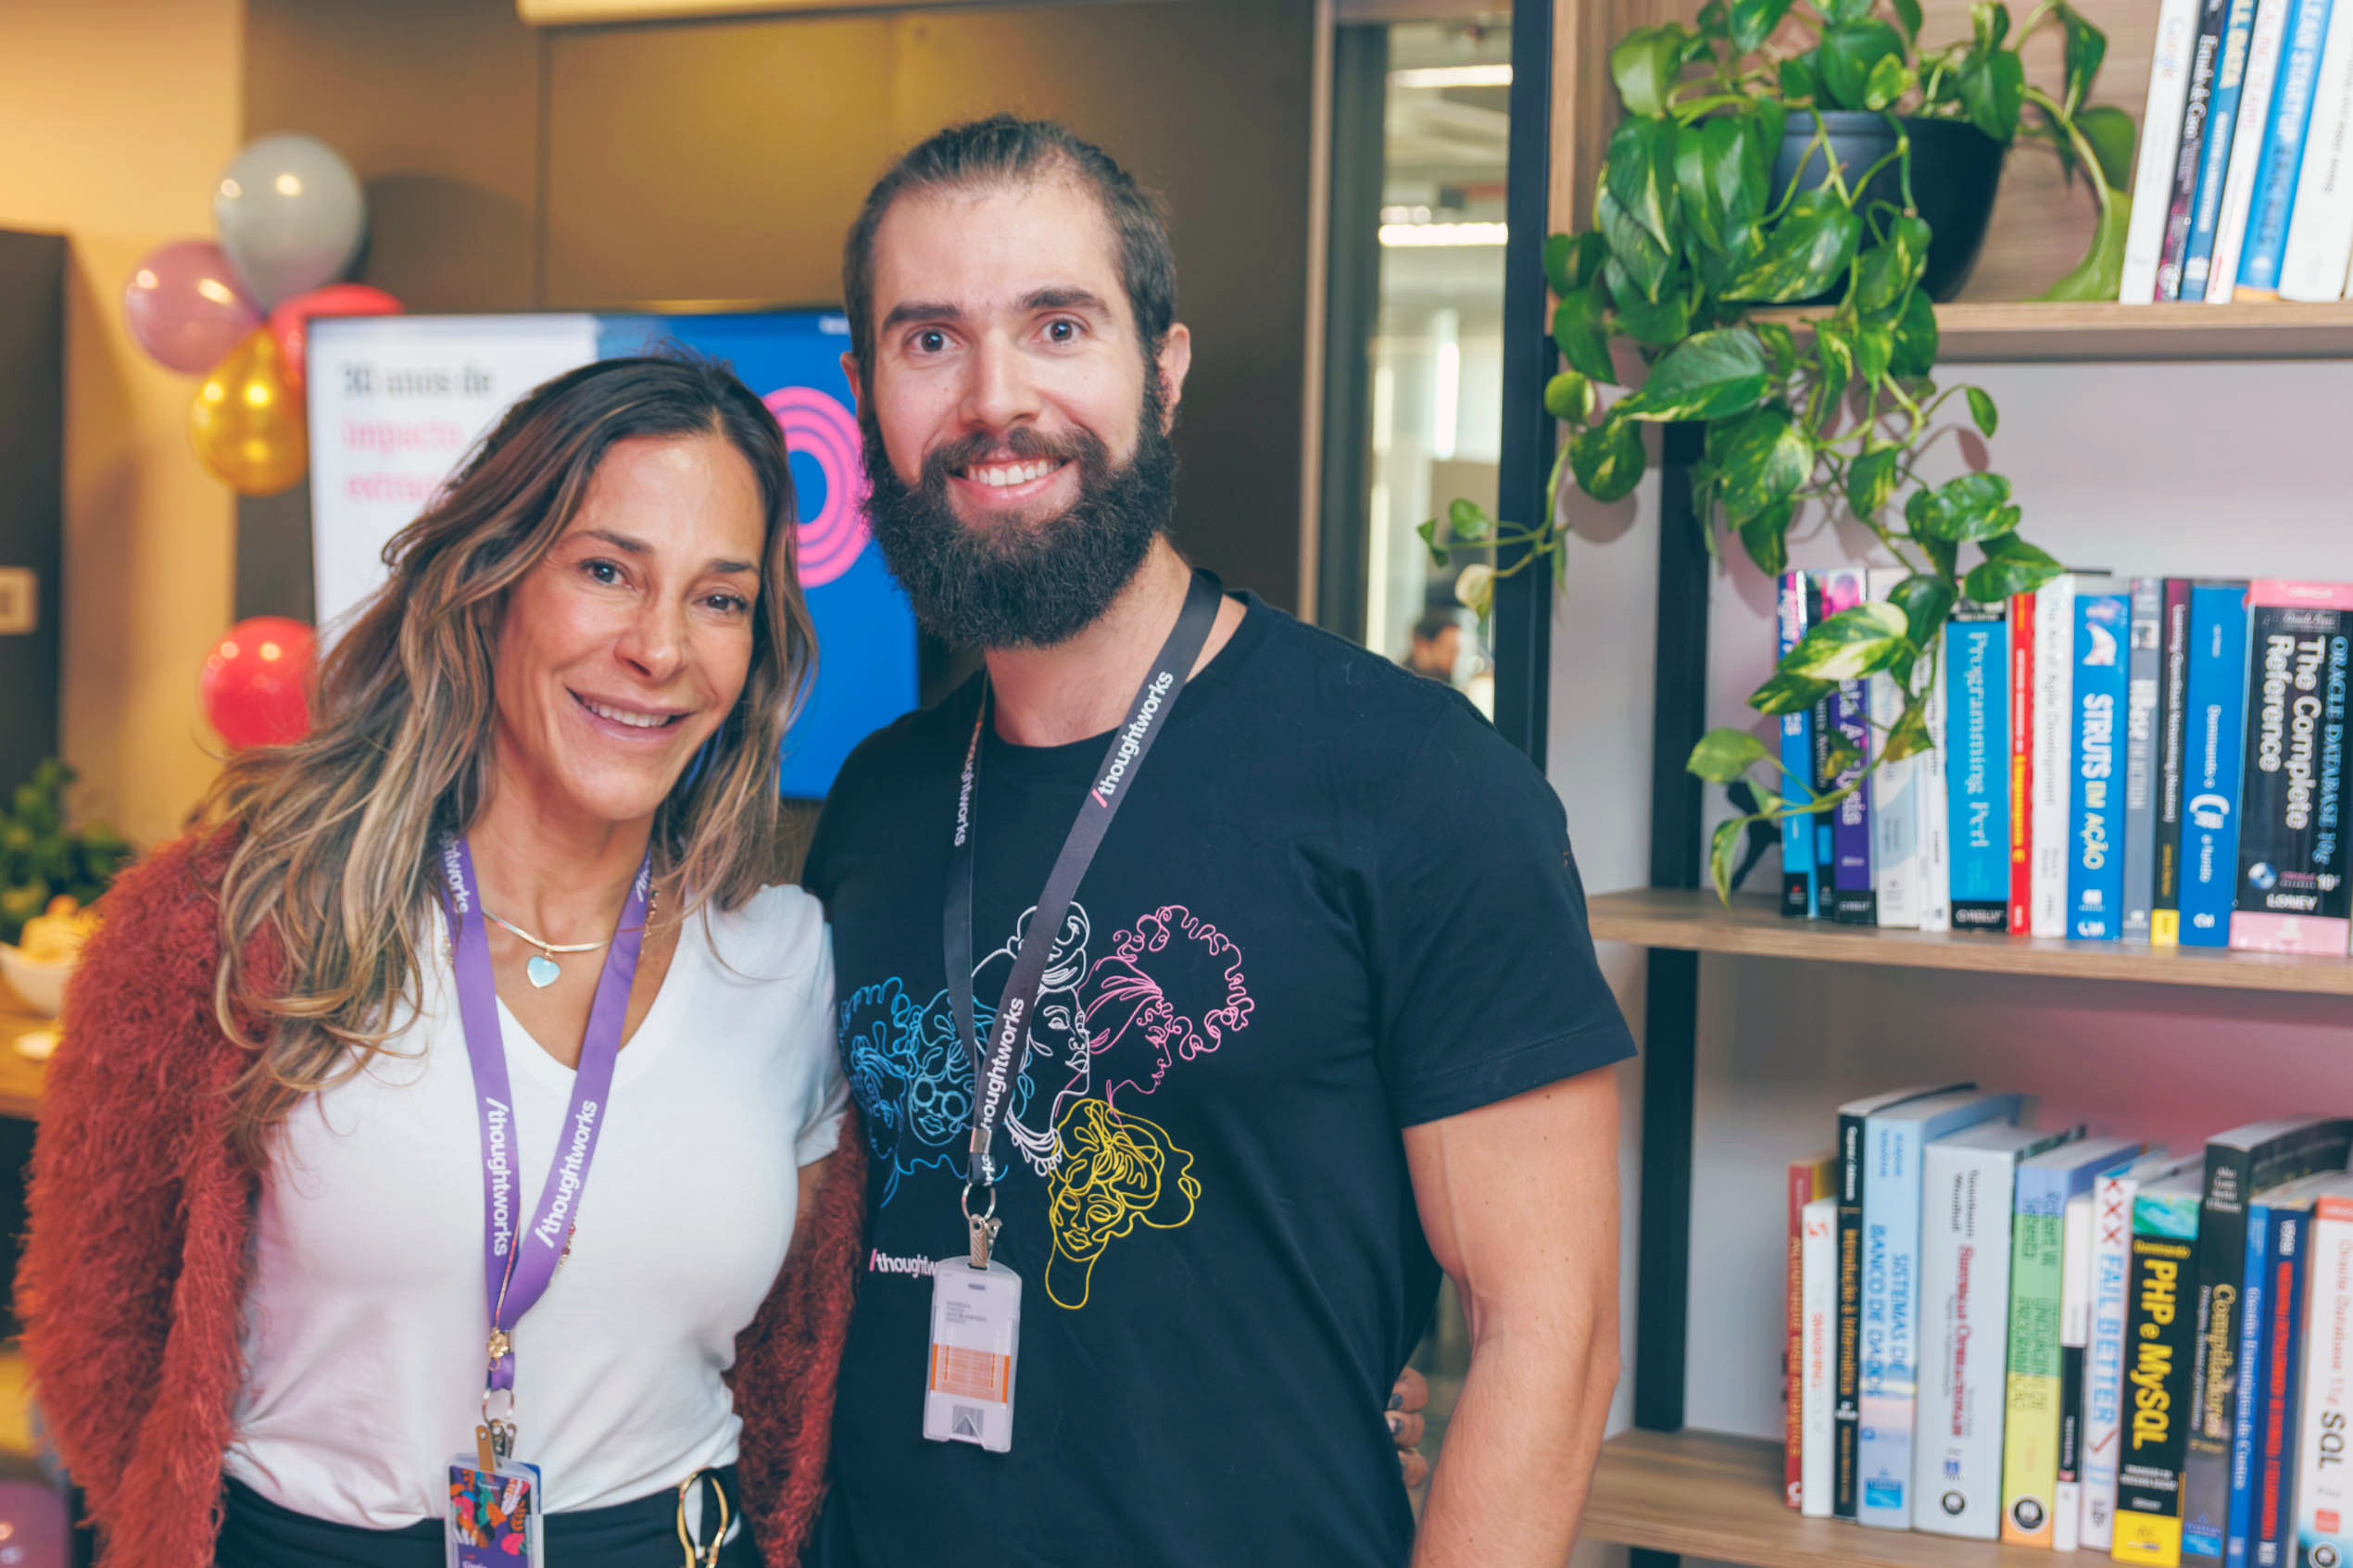 A woman on the left and a man embracing with badges in the Thoughtworks office. To the left of the man, there is a bookshelf. In the background, there is a television and balloons.